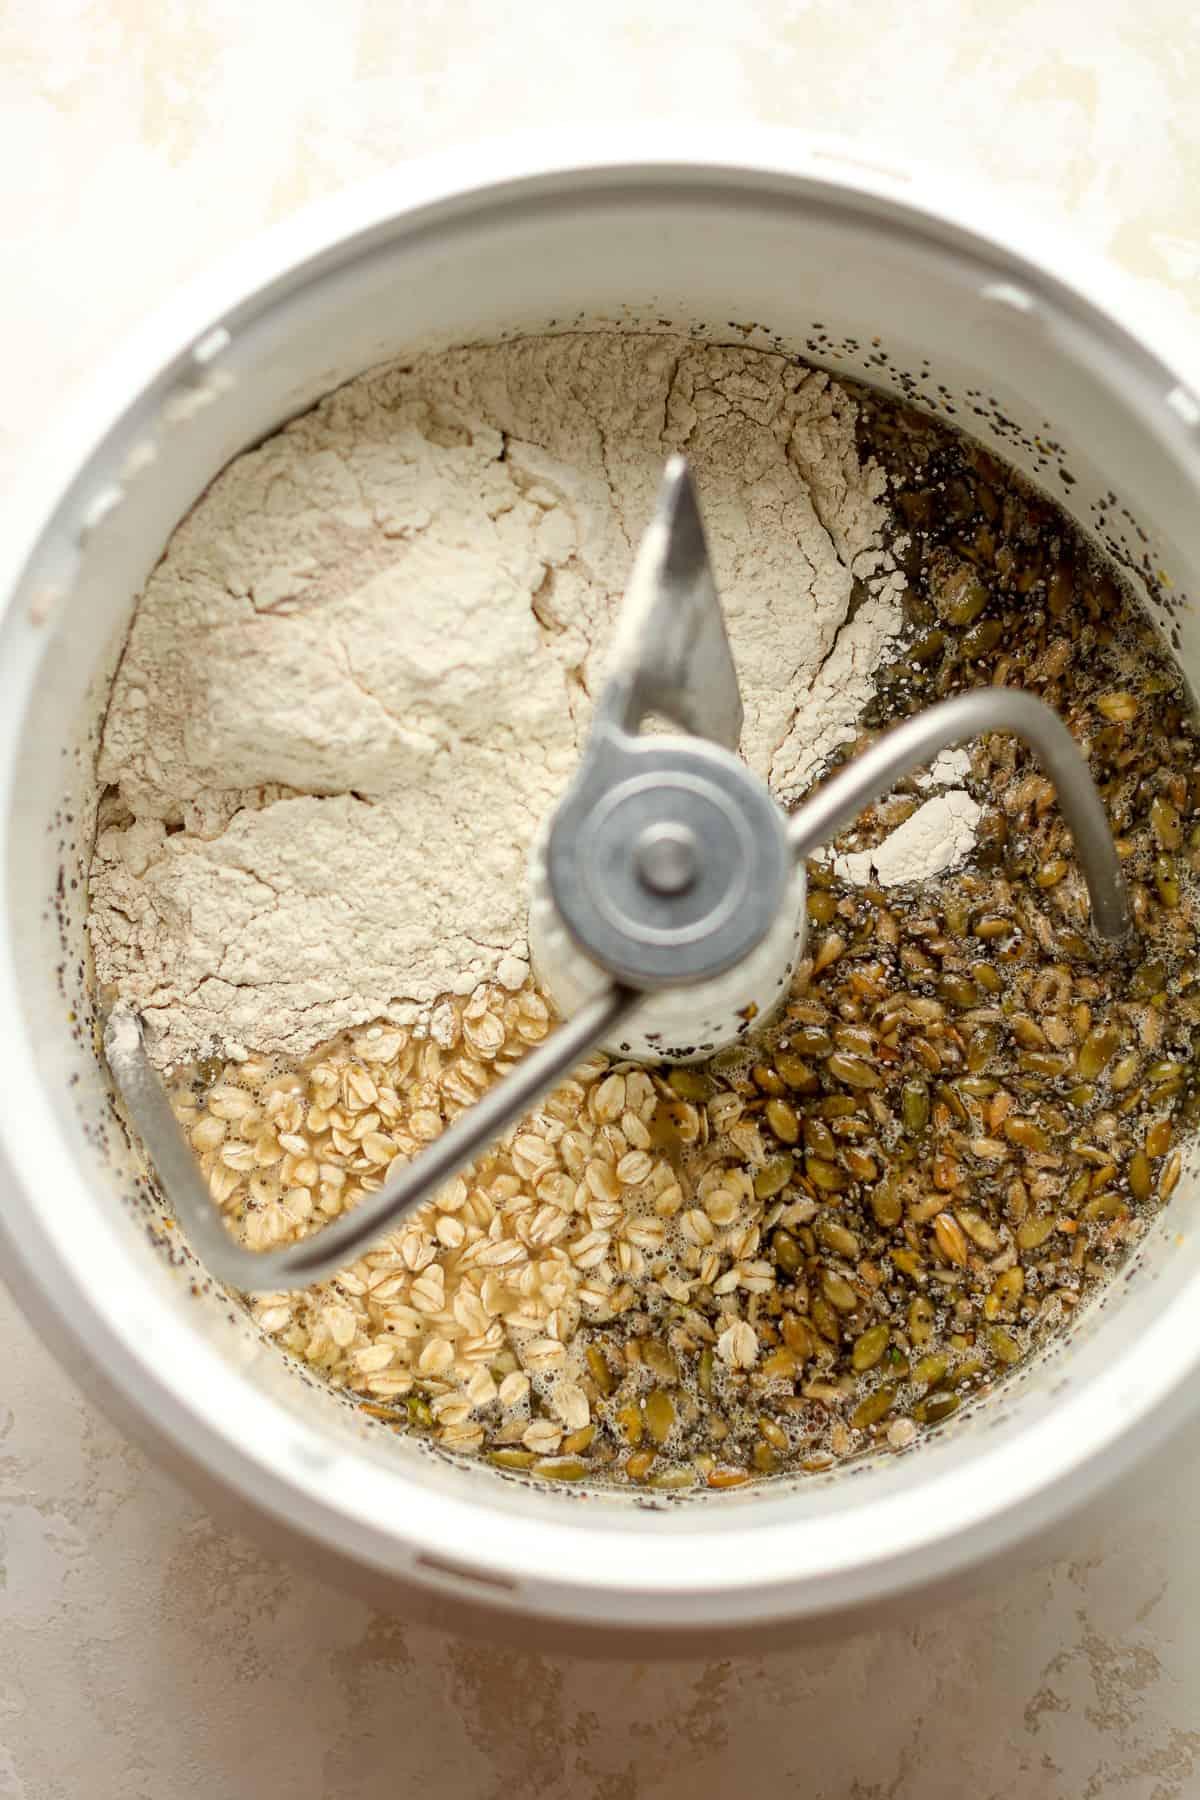 The mixer bowl with the ingredients showing the oatmeal, seeds, nuts, and flour.